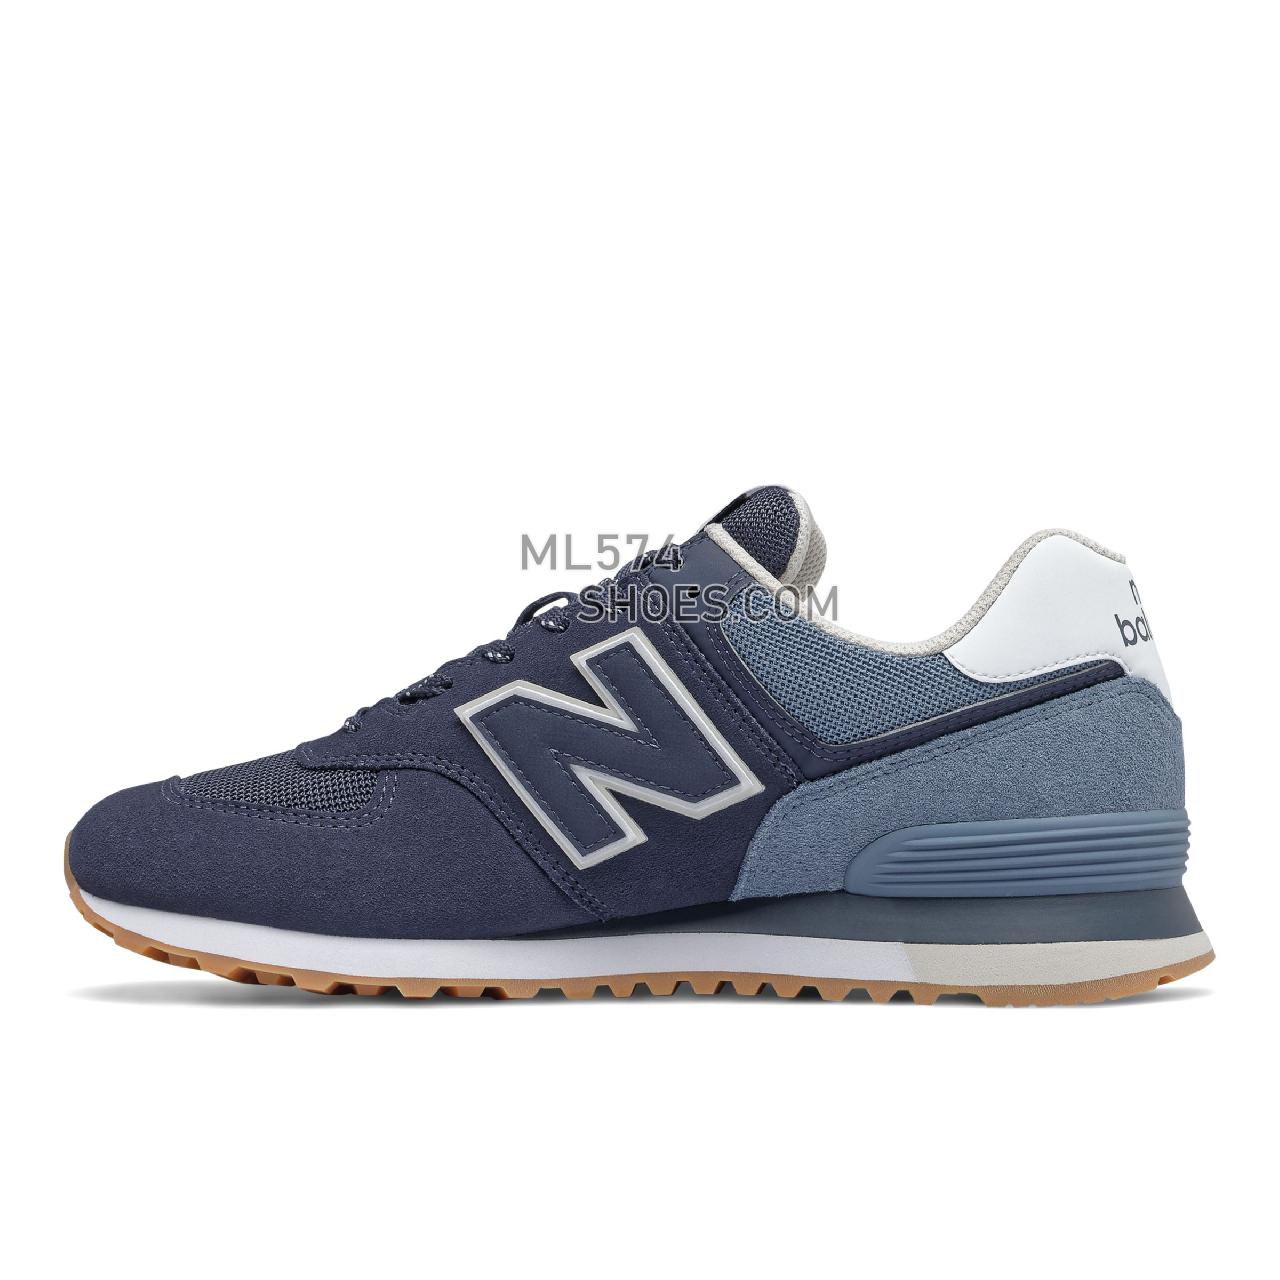 New Balance 574v2 - Men's Classic Sneakers - Nb Navy with Deep Porcelain Blue - ML574GRE